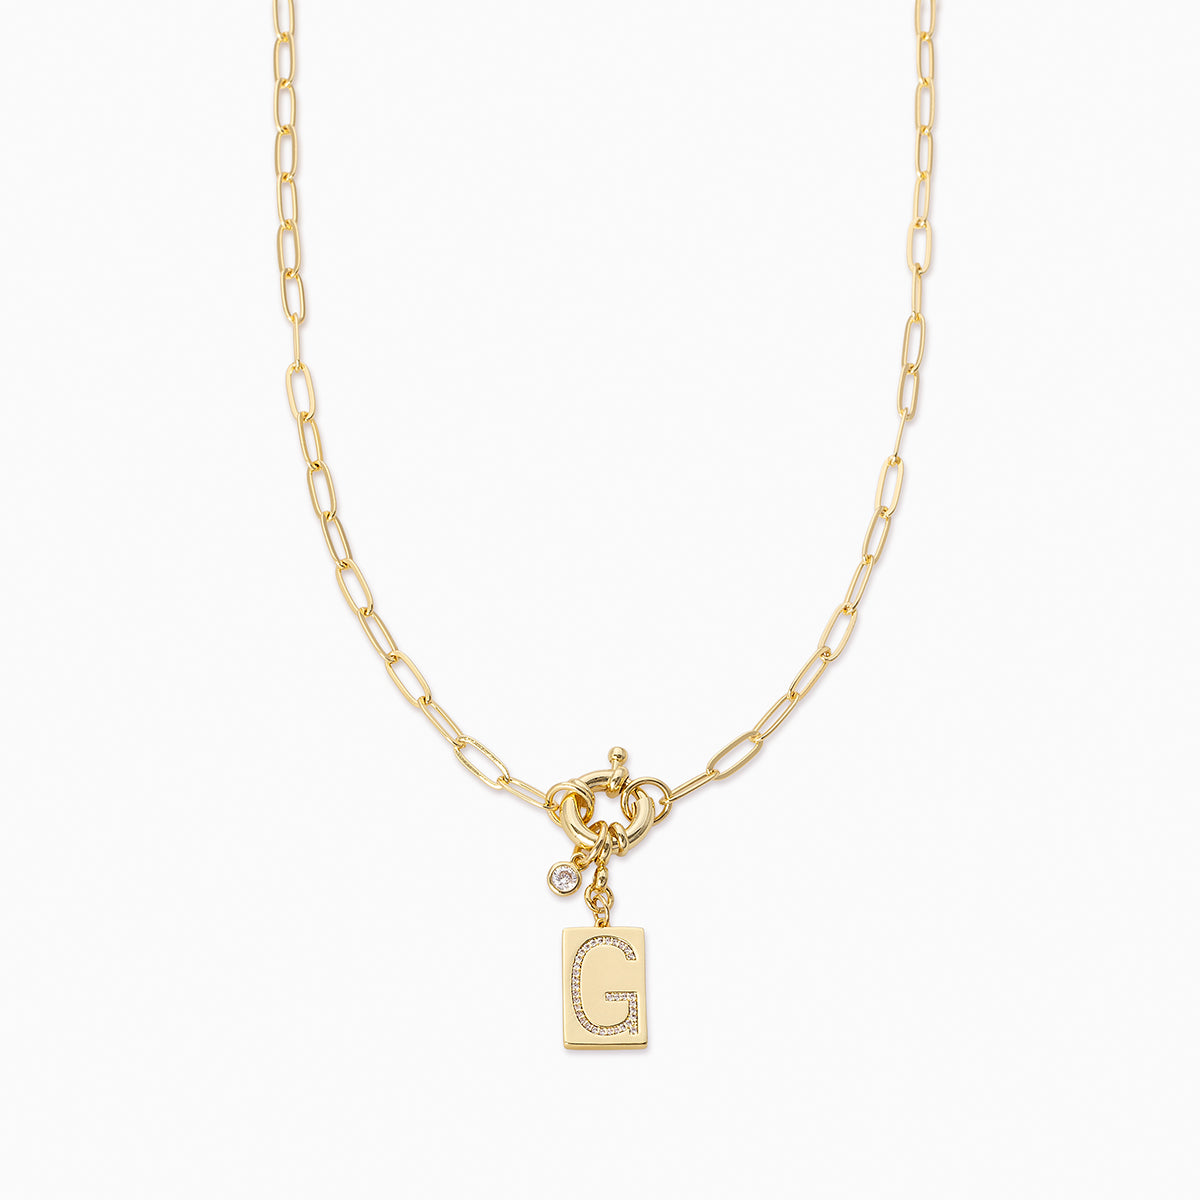 Initial Pendant L Letter Charms Diamond Necklace 14K Gold-G,I1 18 Chain / White Gold